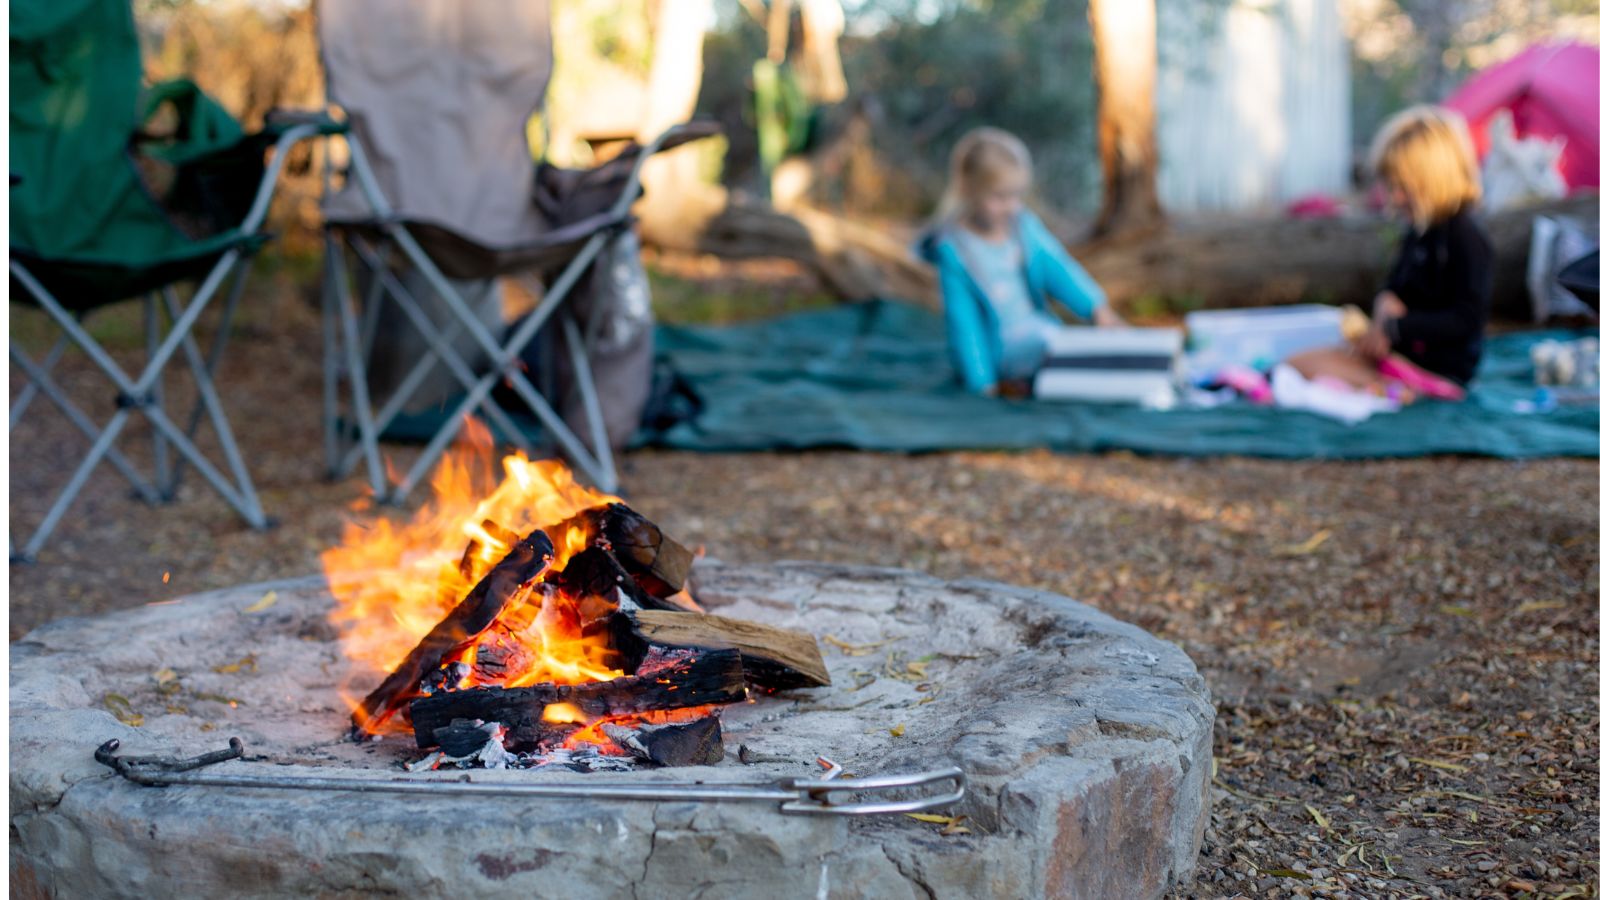 https://familyvacationist.com/wp-content/uploads/2021/04/camp-fire-and-kids.jpg